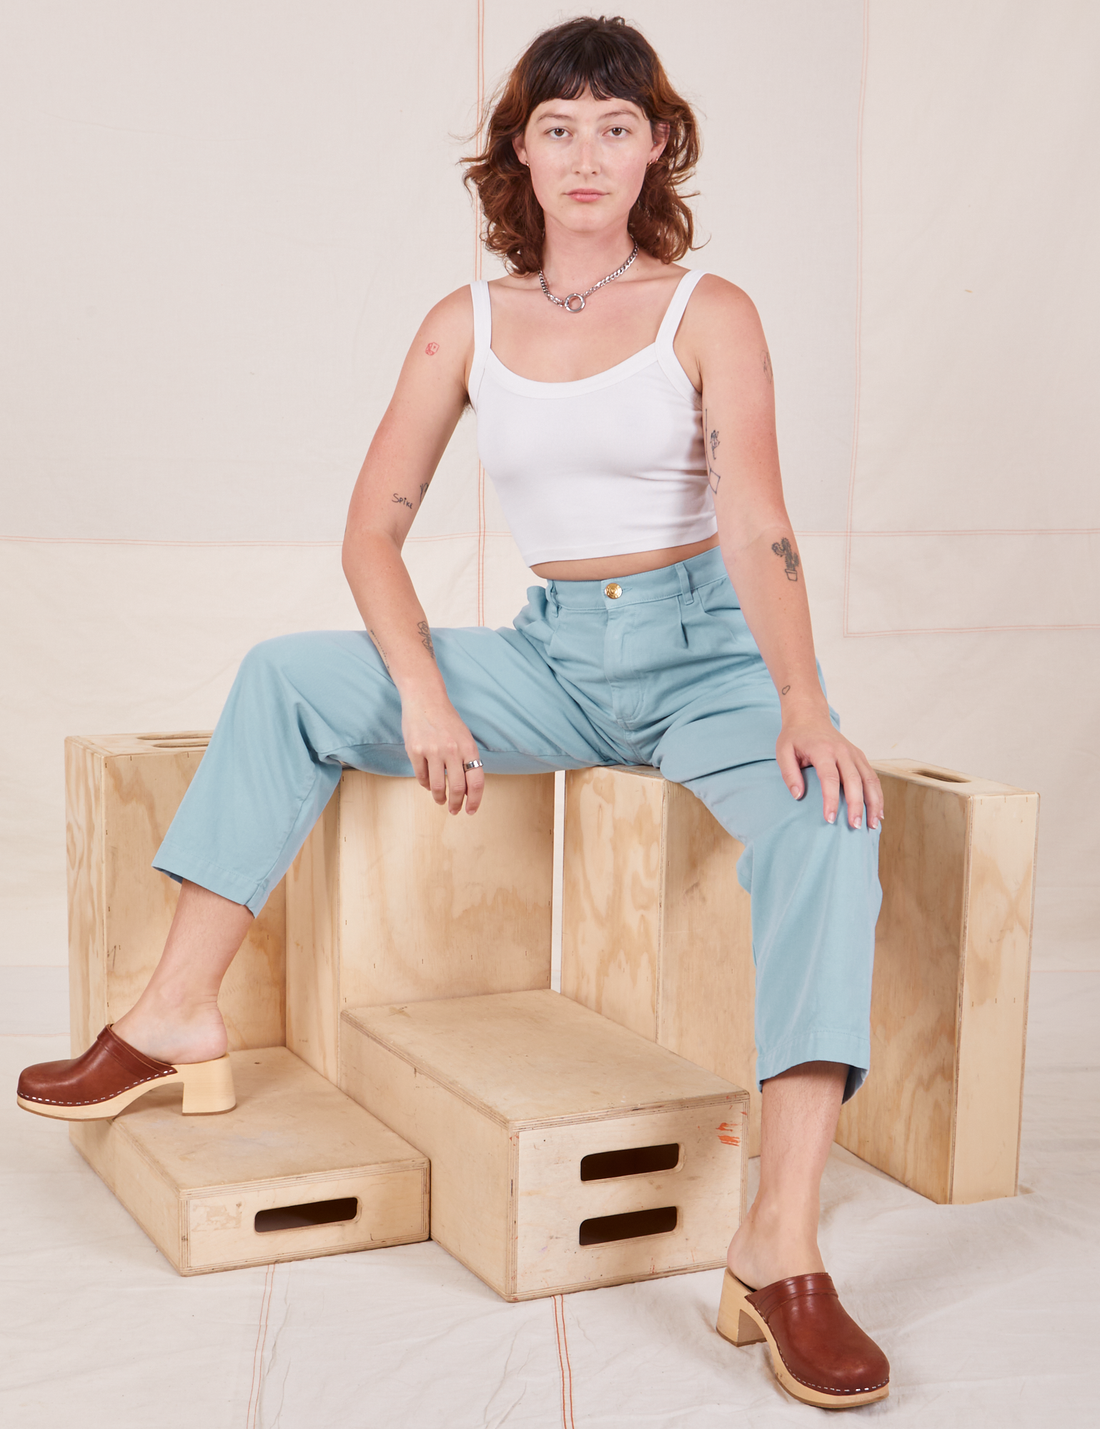 Alex is wearing Heavyweight Trousers in Baby Blue and vintage off-white Cropped Cami